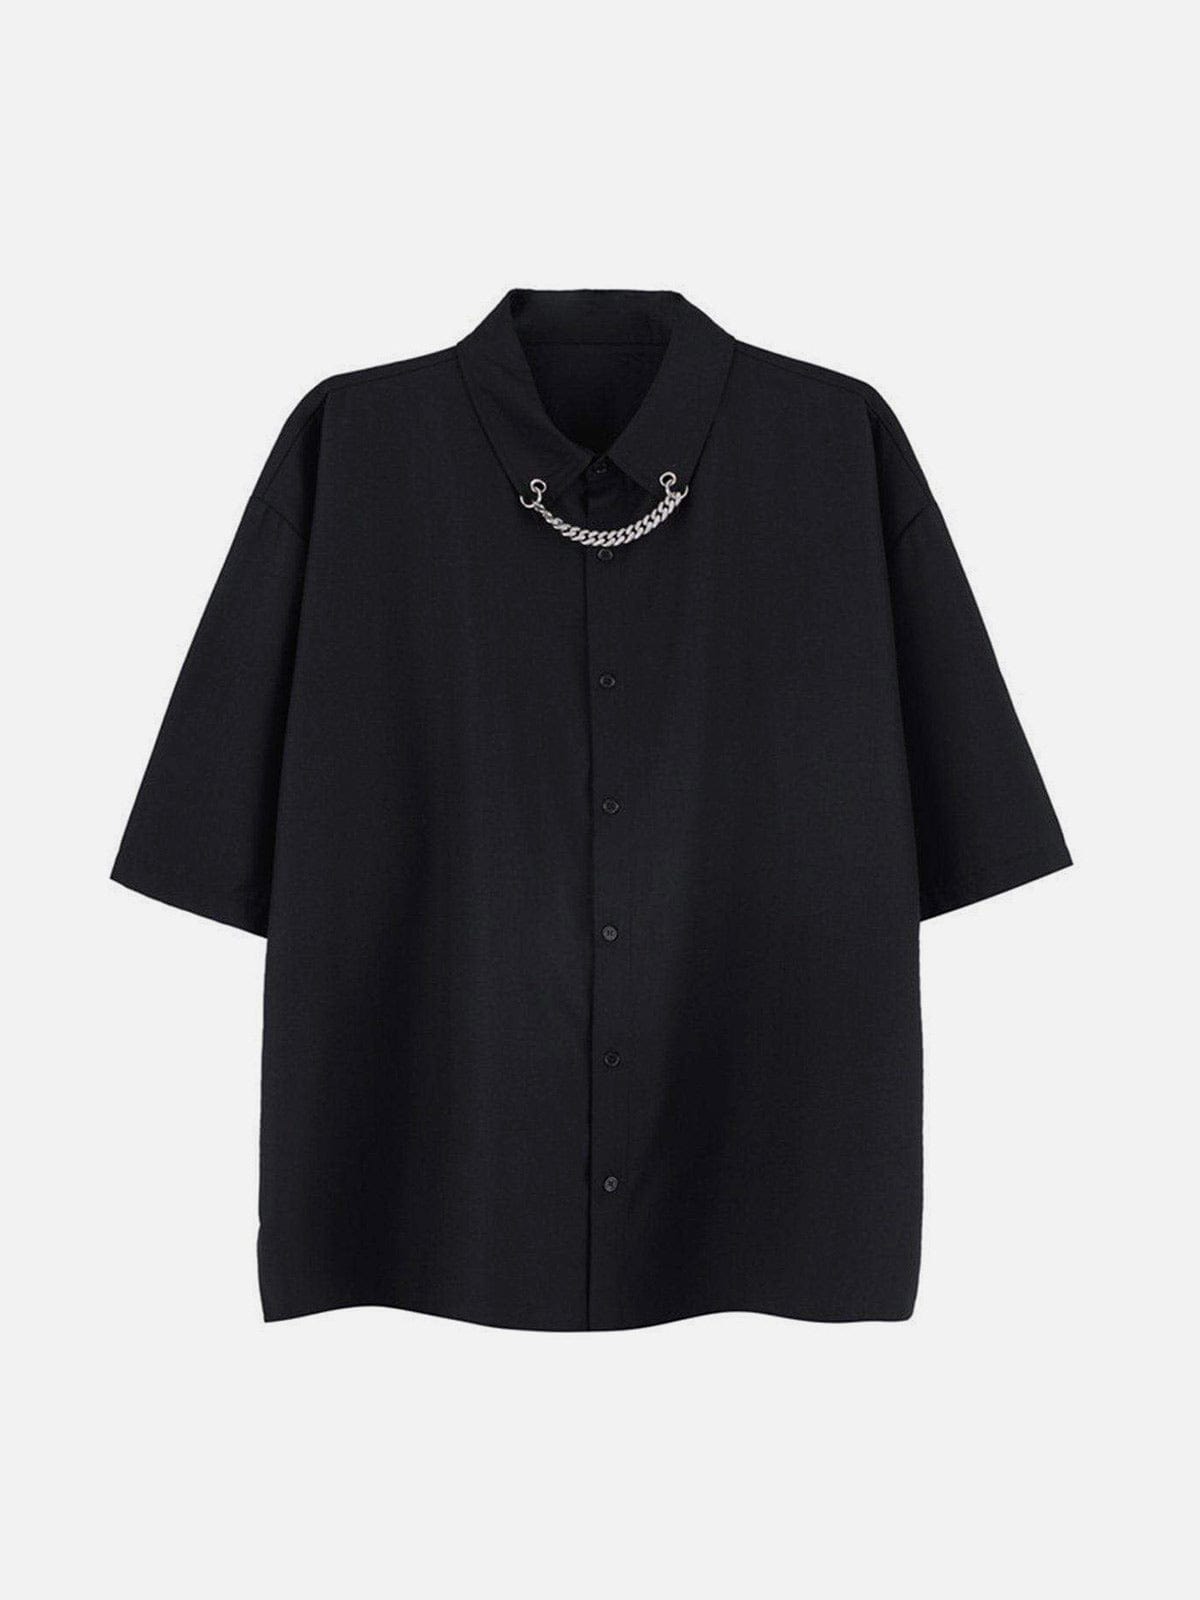 NEV Pure Color Hanging Chain Oversized Shirt